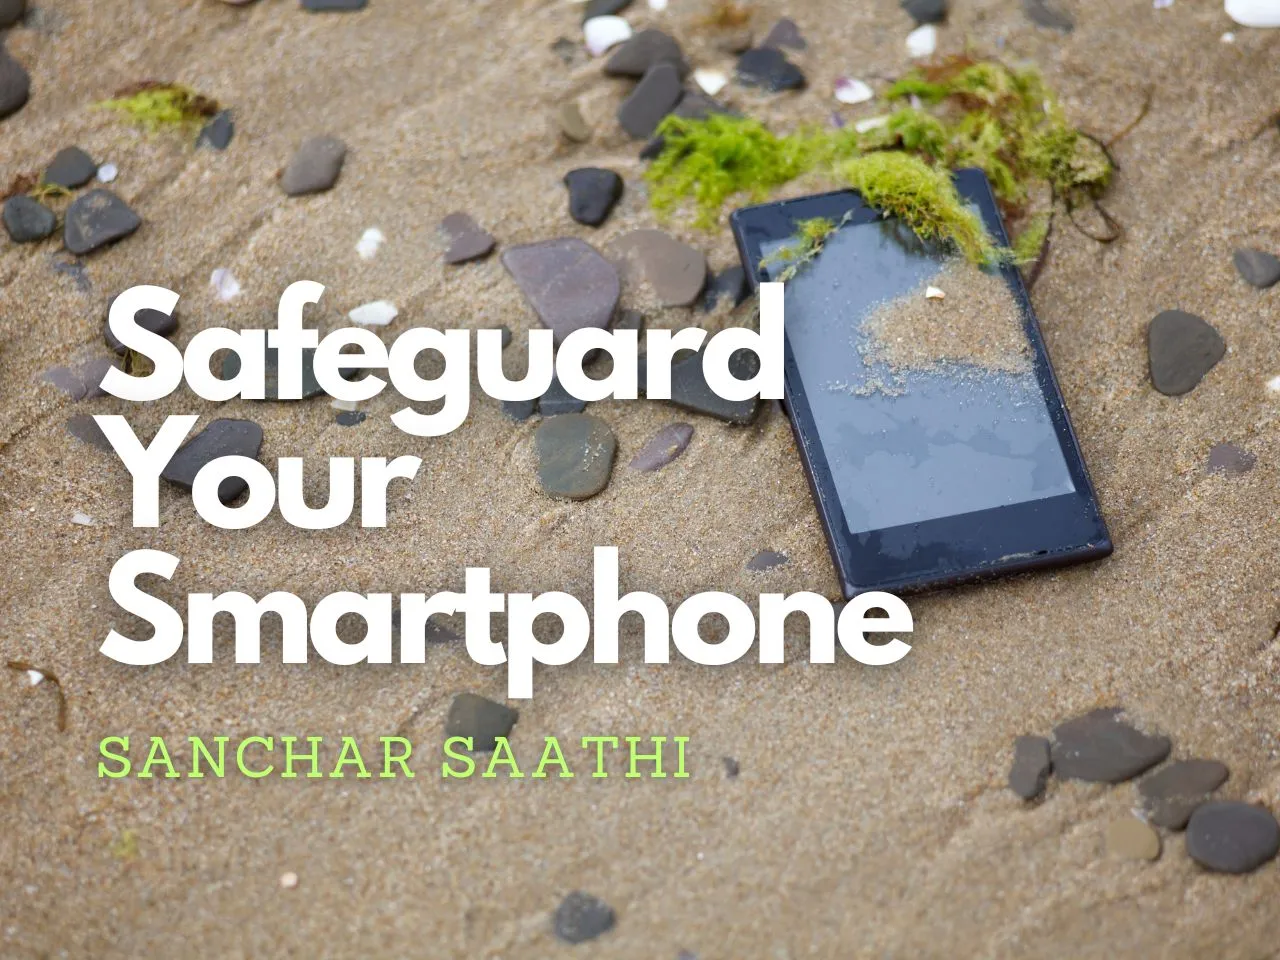 Lost Your Phone? Don't Worry! Govt's Sanchar Saathi Is Here To Help